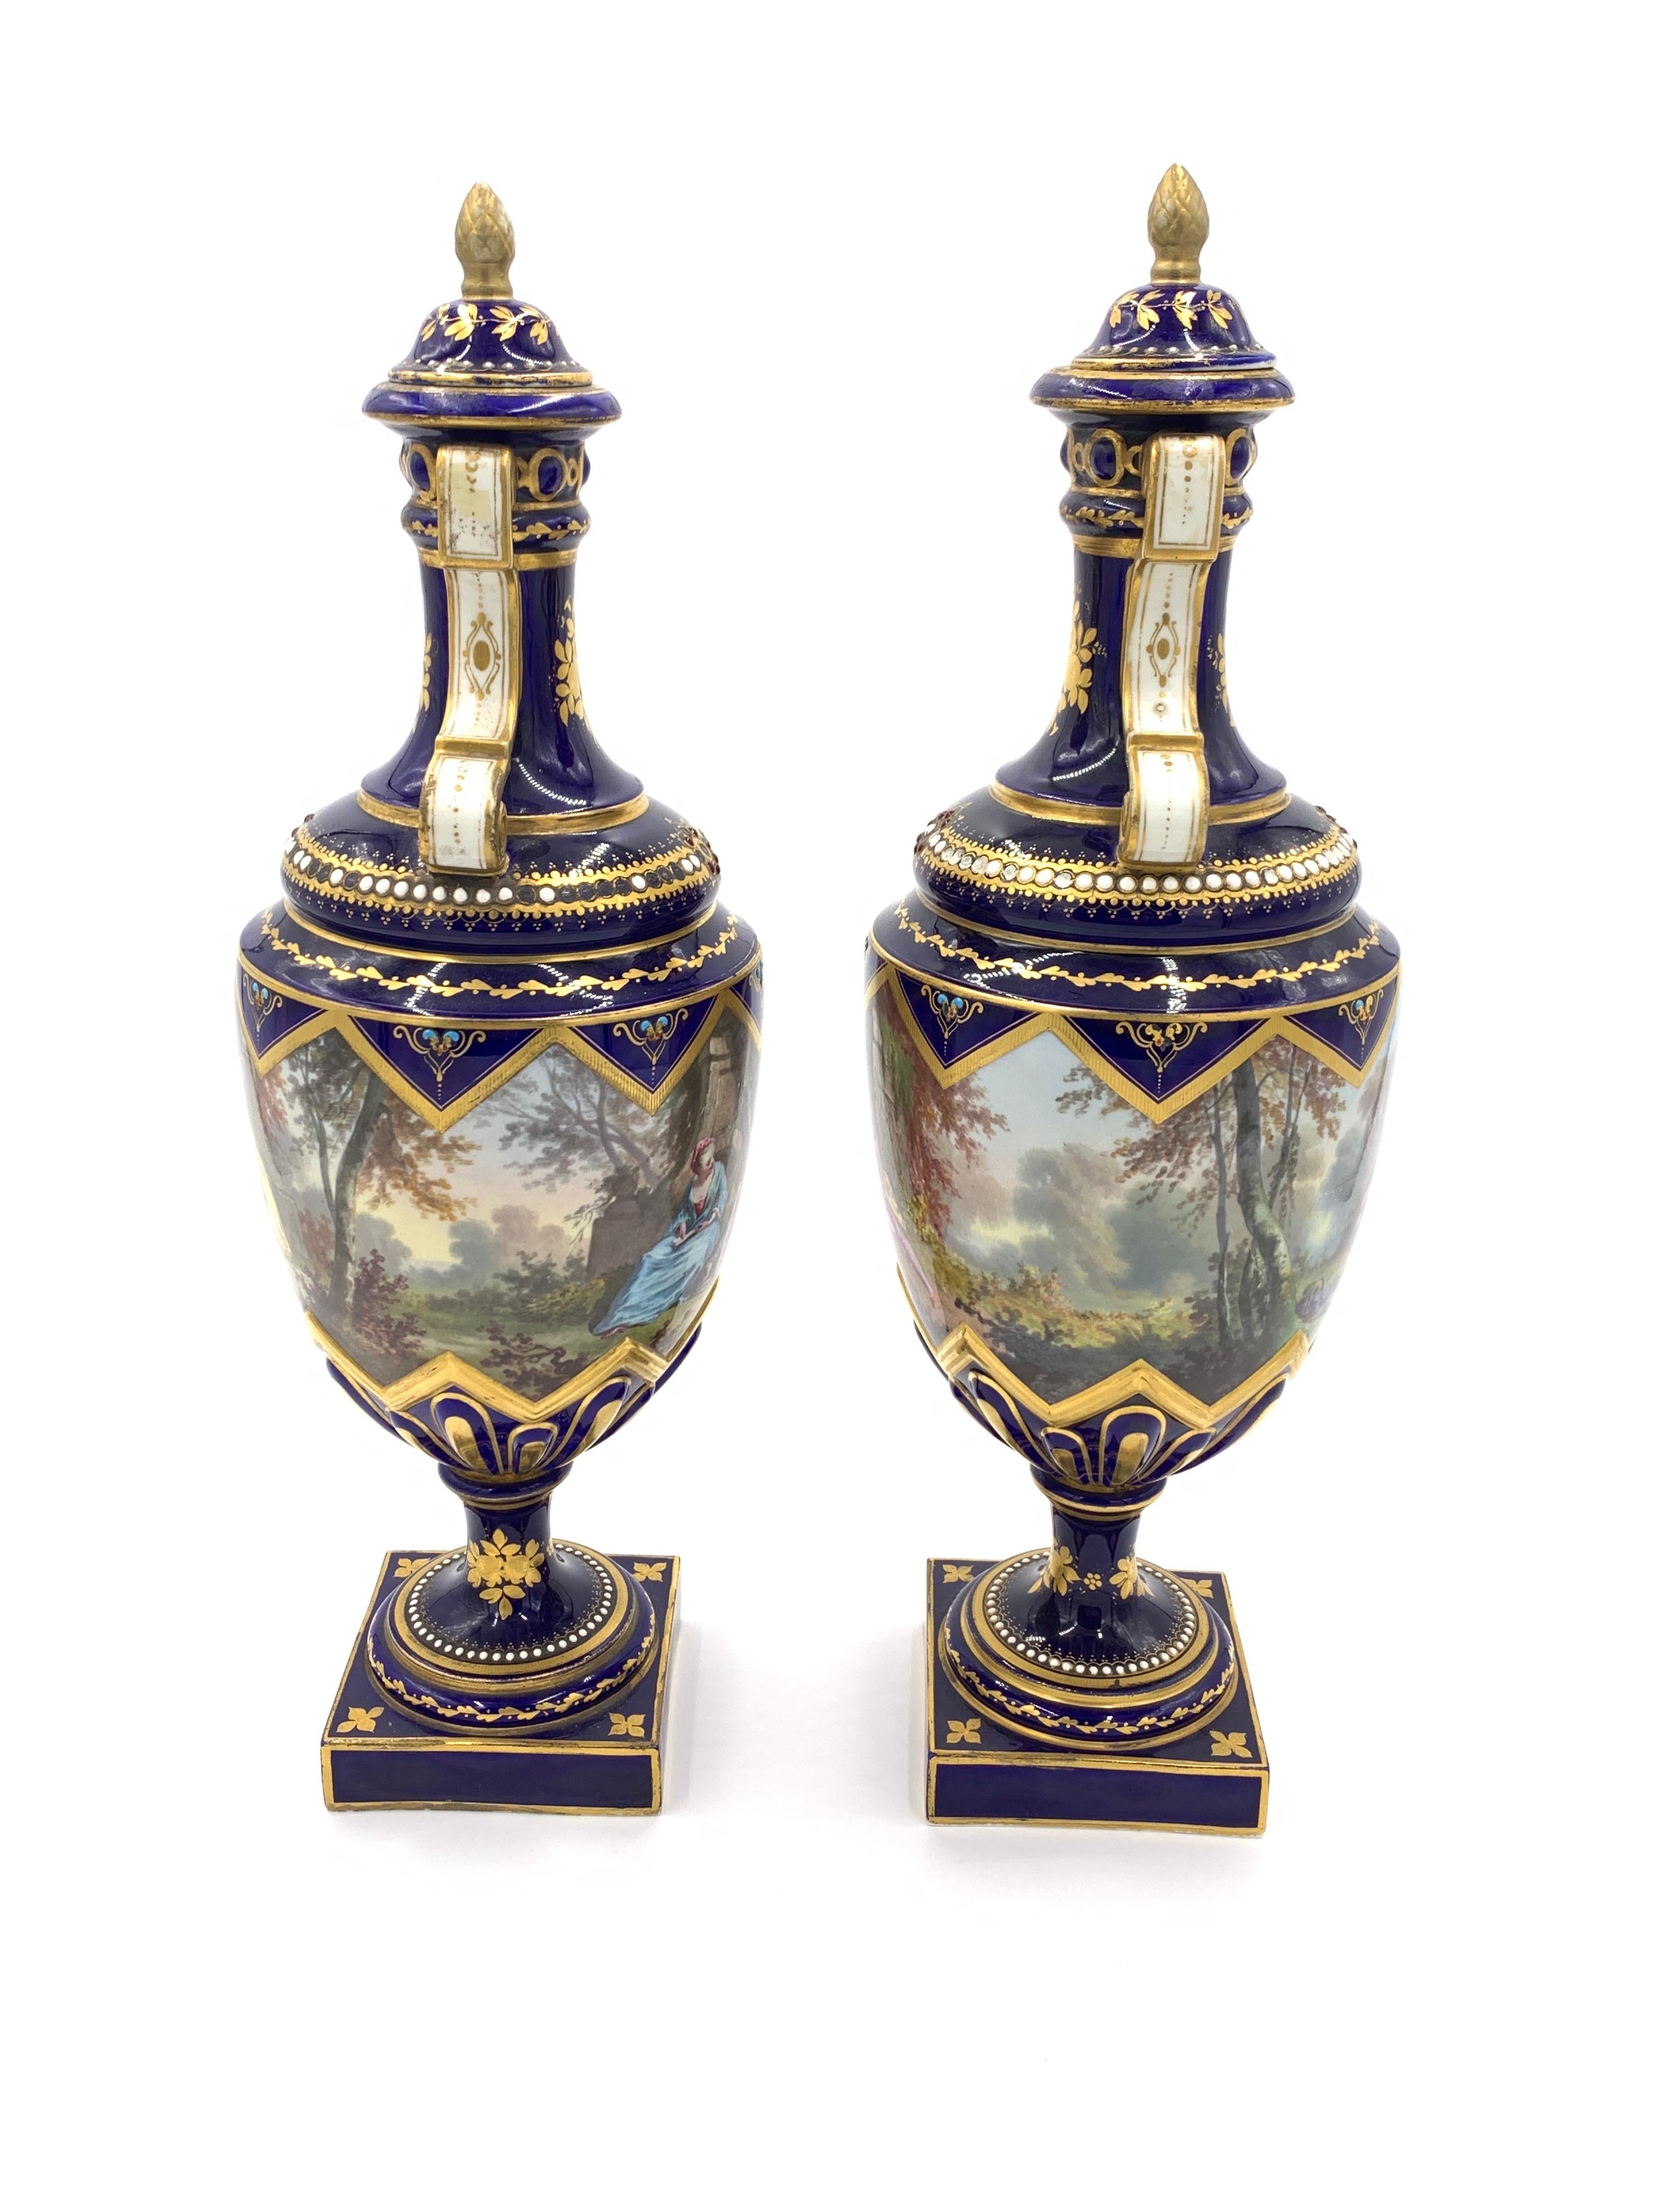 Fine 19th century blue sevres style vases with paintings all around the ovoid body, gold inlaid all around the vases with semi precious stones.
  